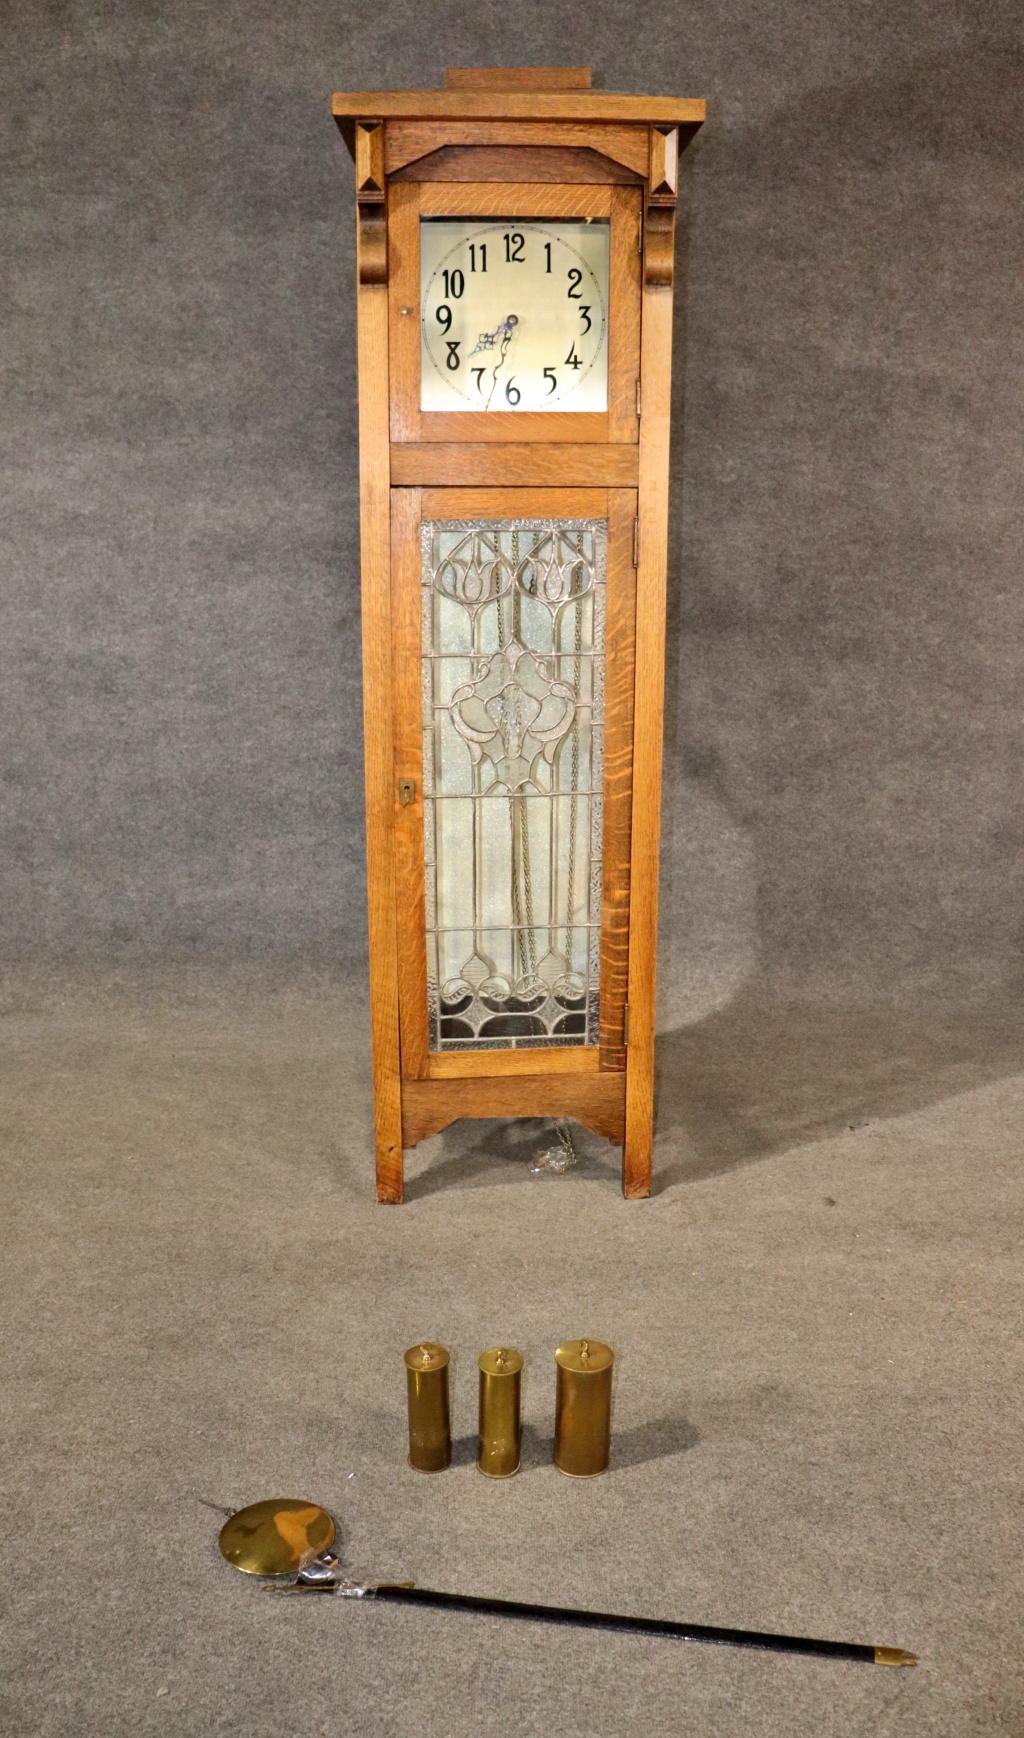 Germany. 173768. Oak frame. Stained glass panel doors. With weights and pendulum. 78 5/8